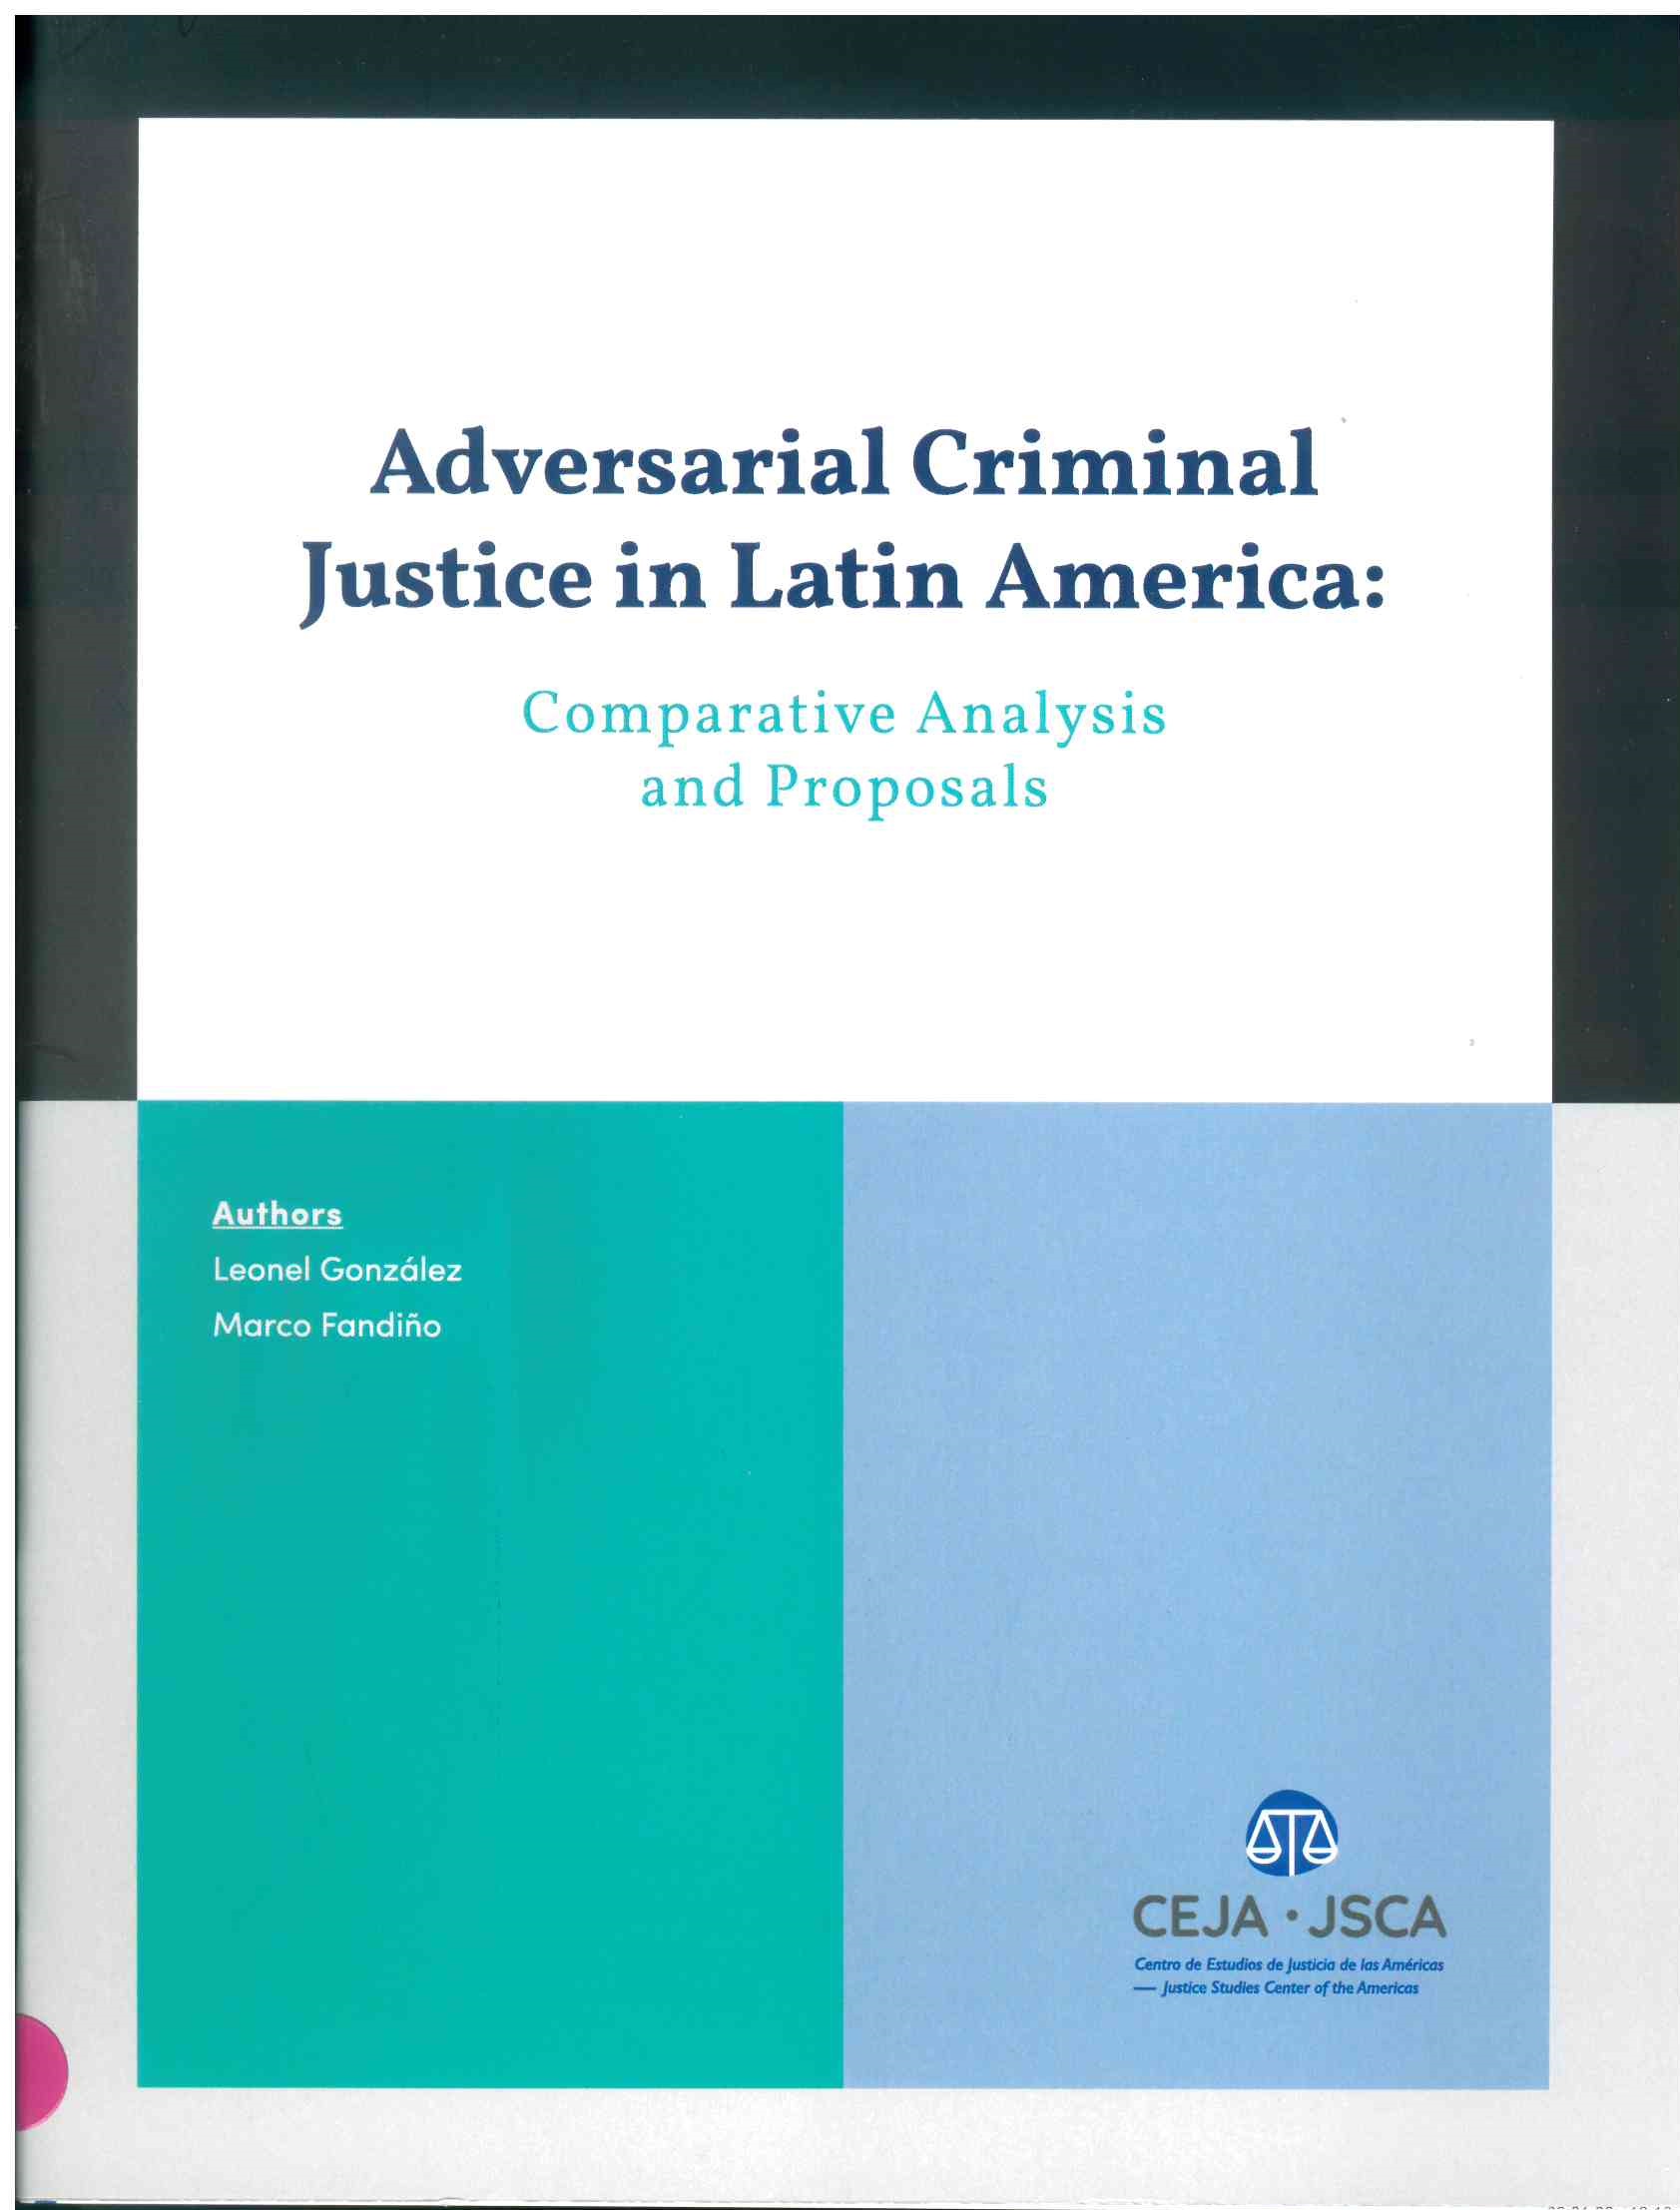 Adversarial Criminal Justice in Latin America: Comparative Analysis and Proposals